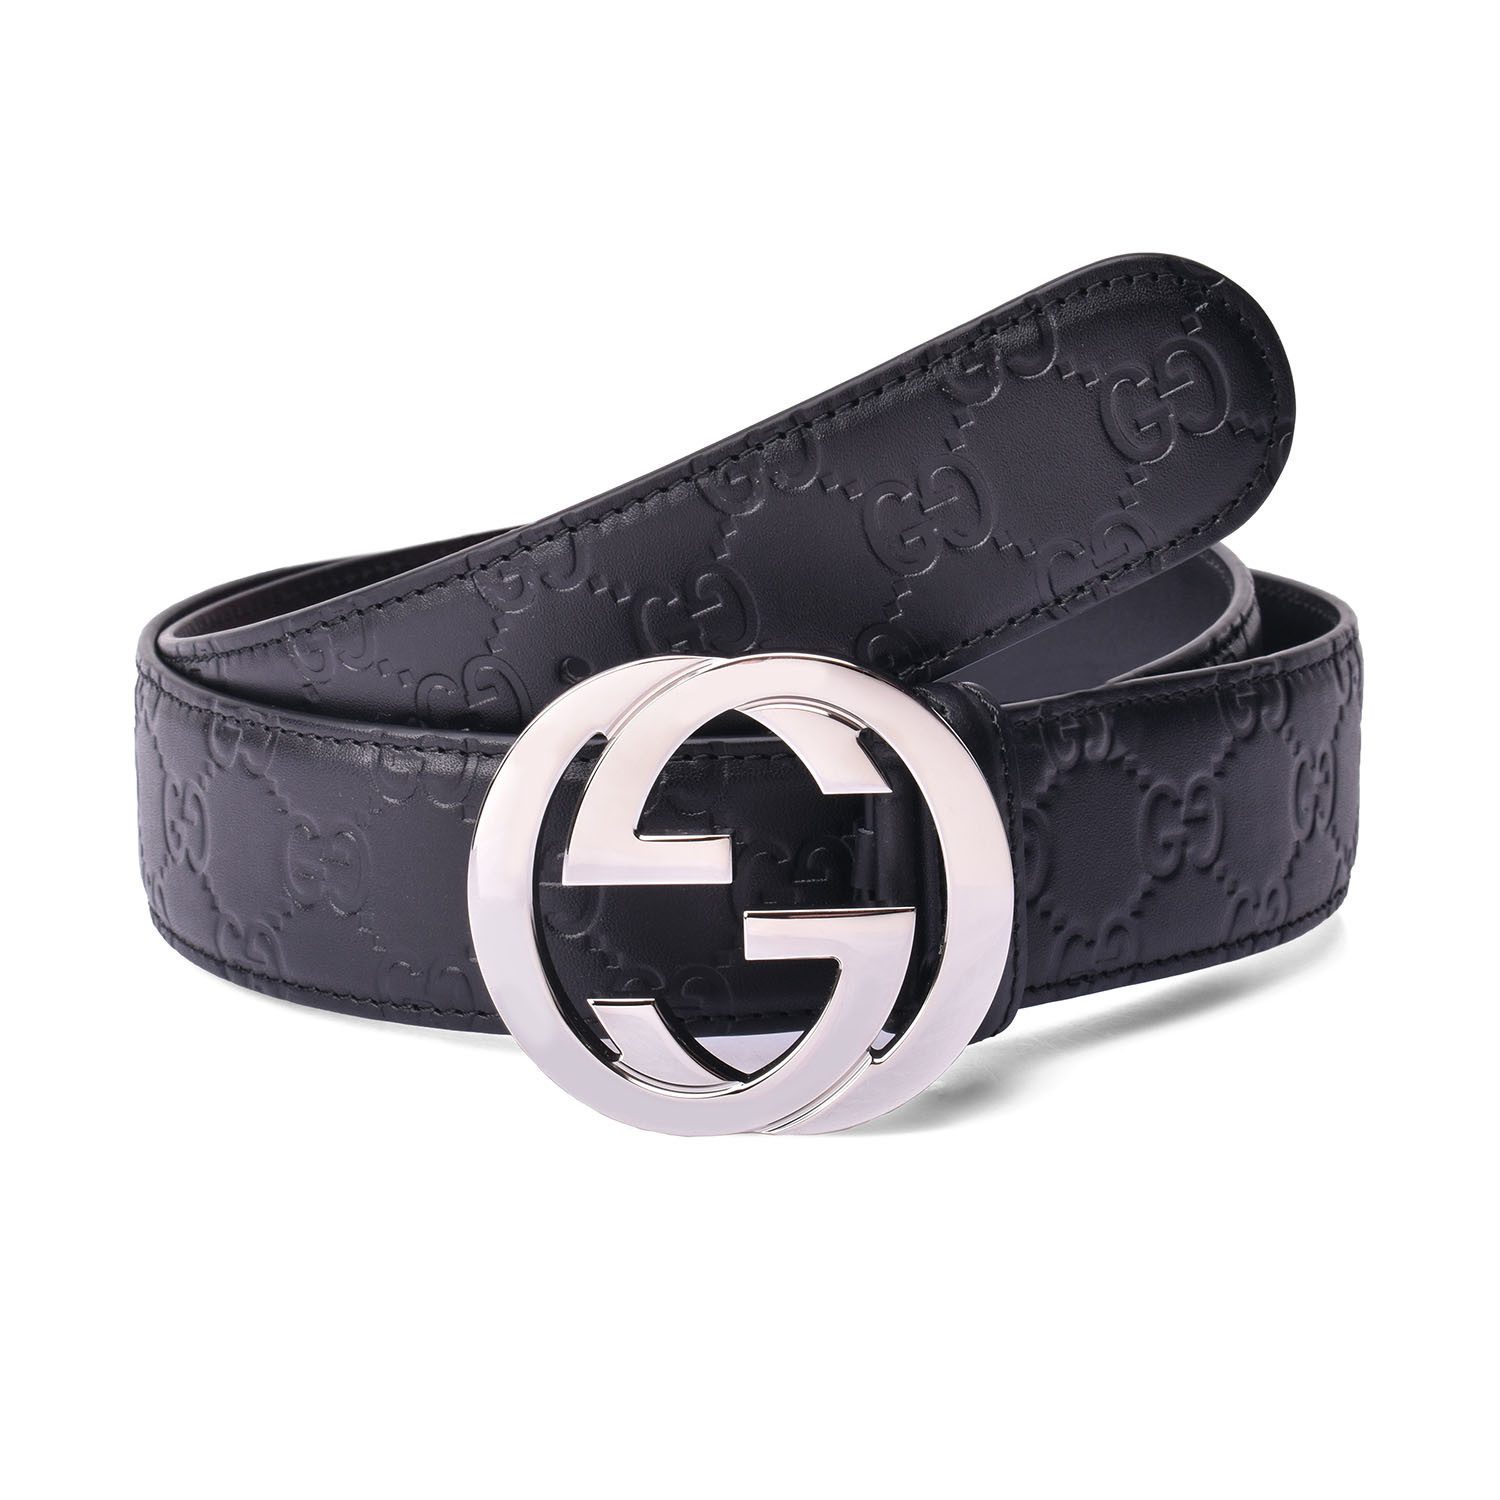 silver and black gucci belt